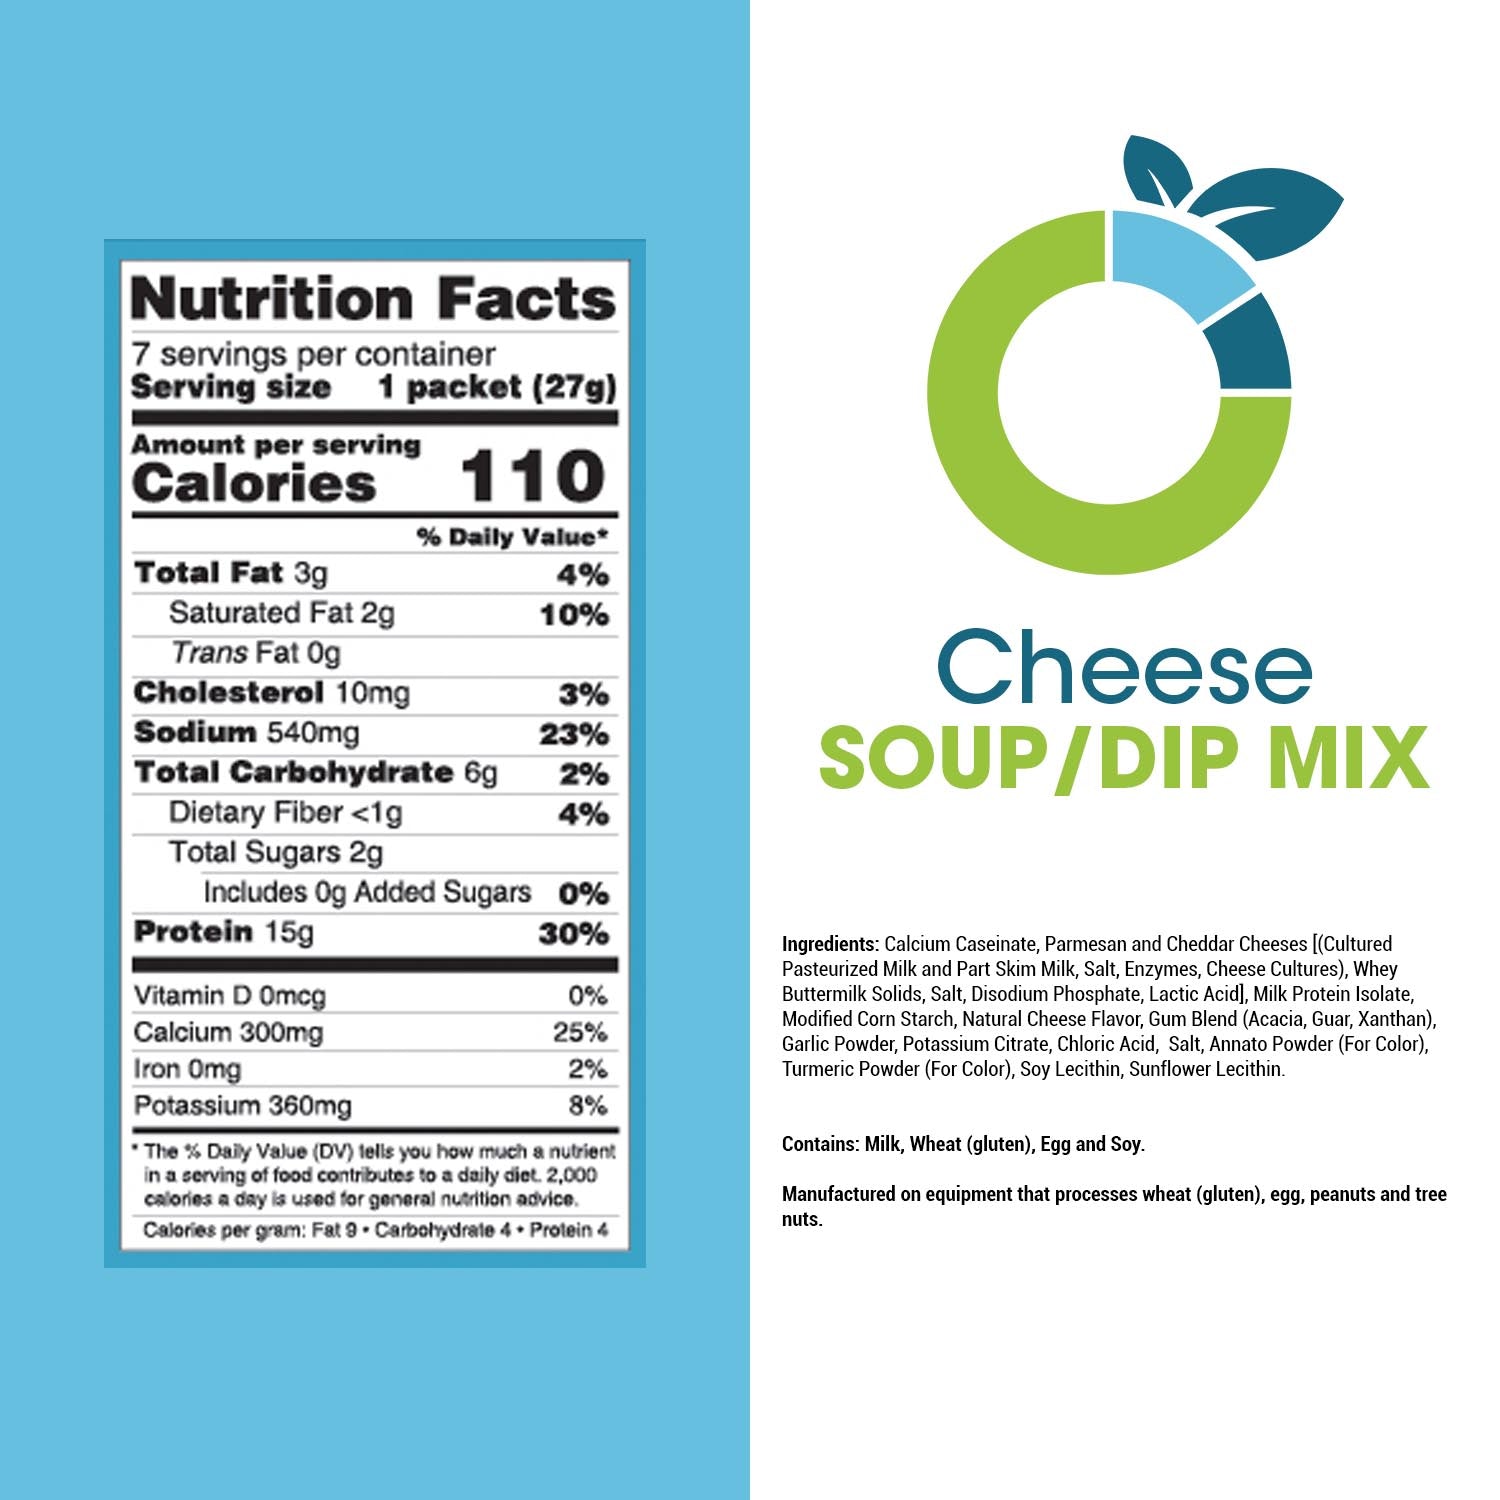 Cheese Soup/Dip Mix